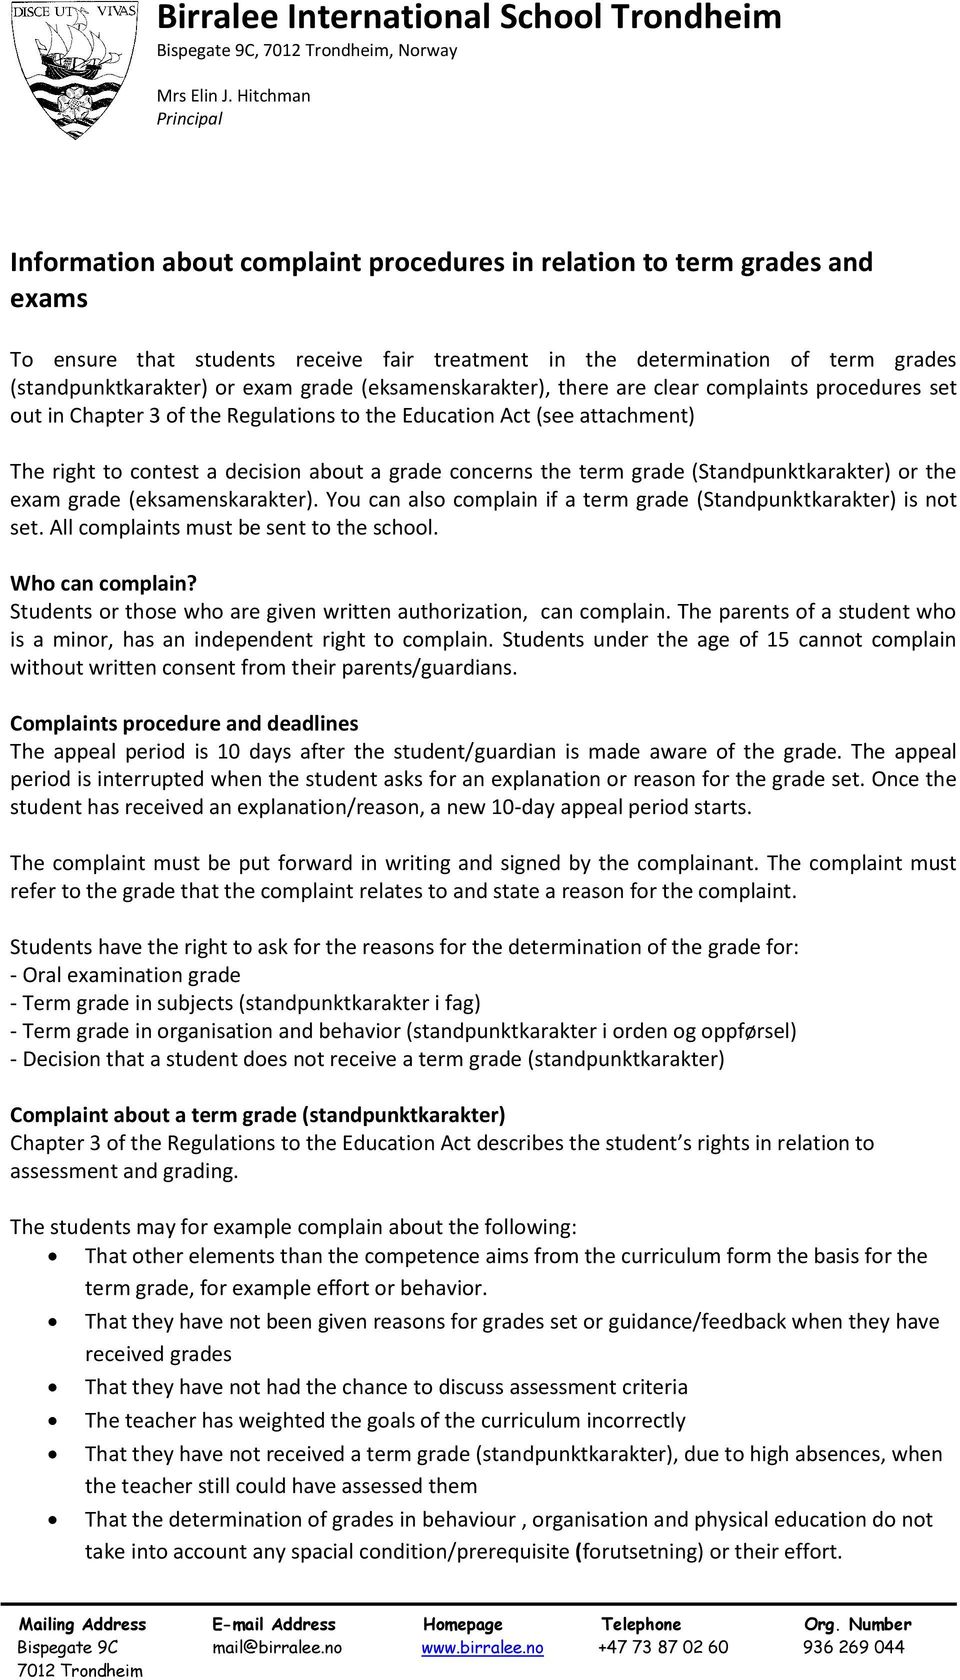 or exam grade (eksamenskarakter), there are clear complaints procedures set out in Chapter 3 of the Regulations to the Education Act (see attachment) The right to contest a decision about a grade